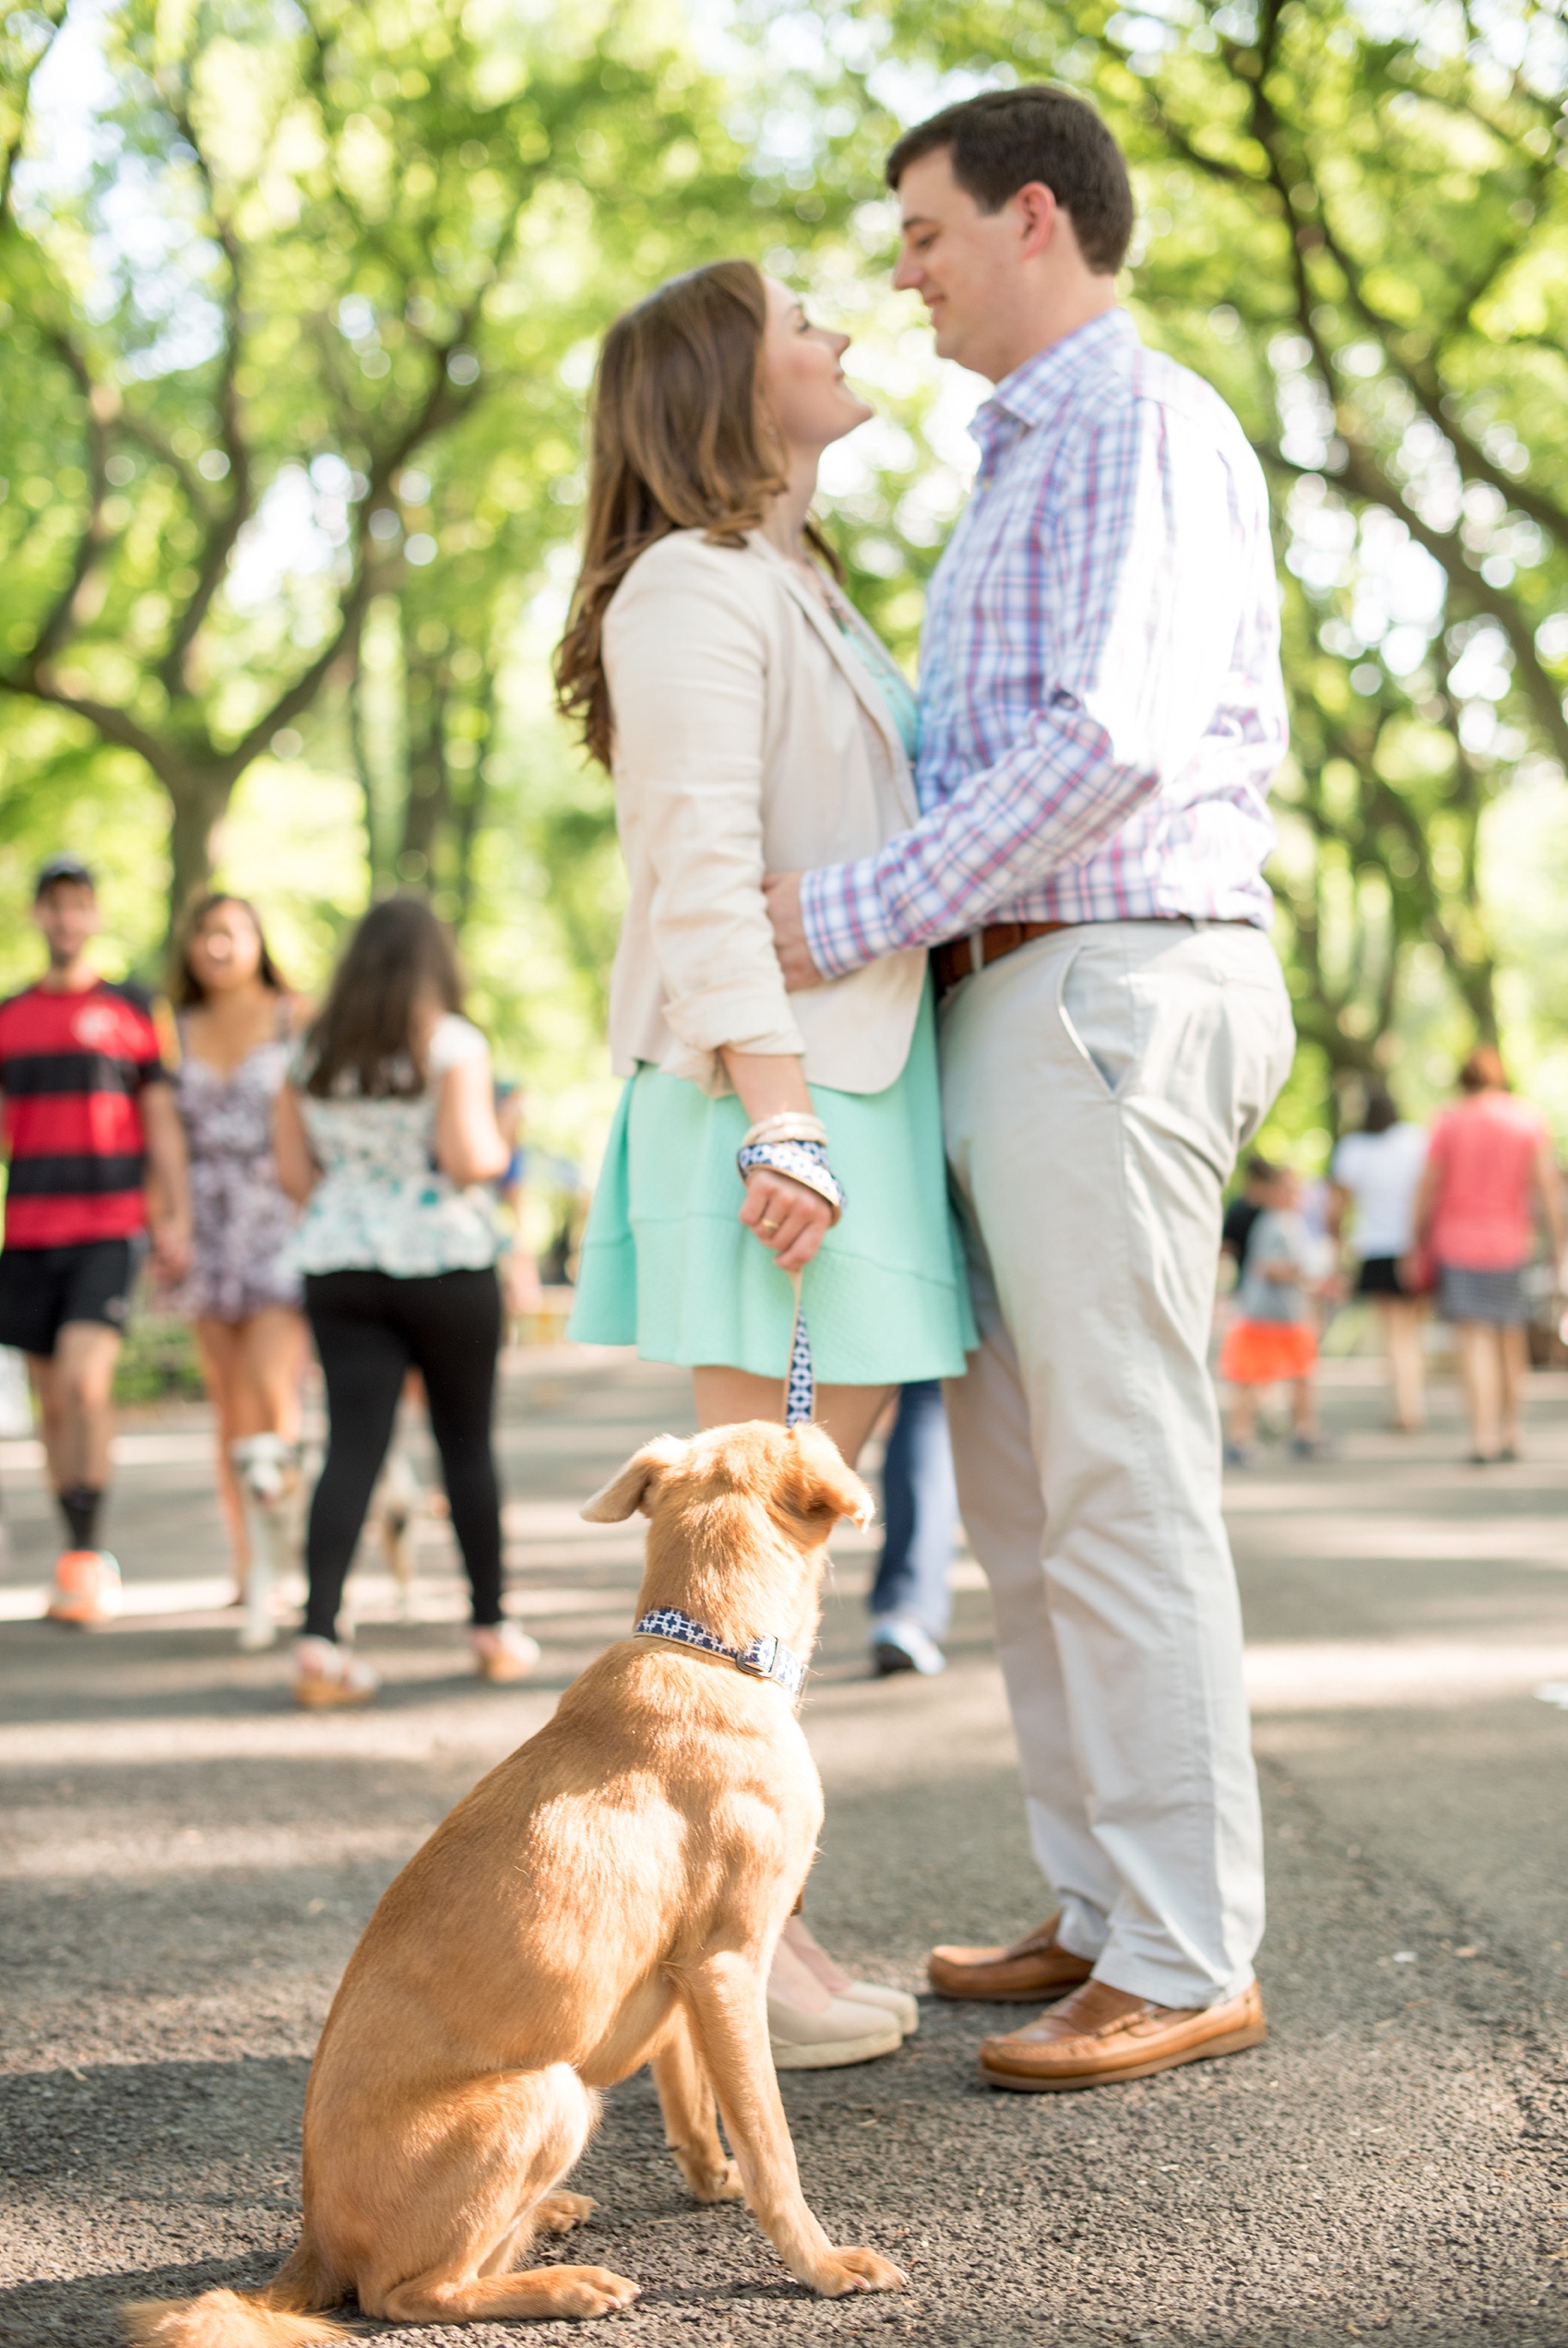 Mikkel Paige Photography tips for bringing your dog to your engagement photo session with an image of a dog and bride and groom in Central Park, NYC.